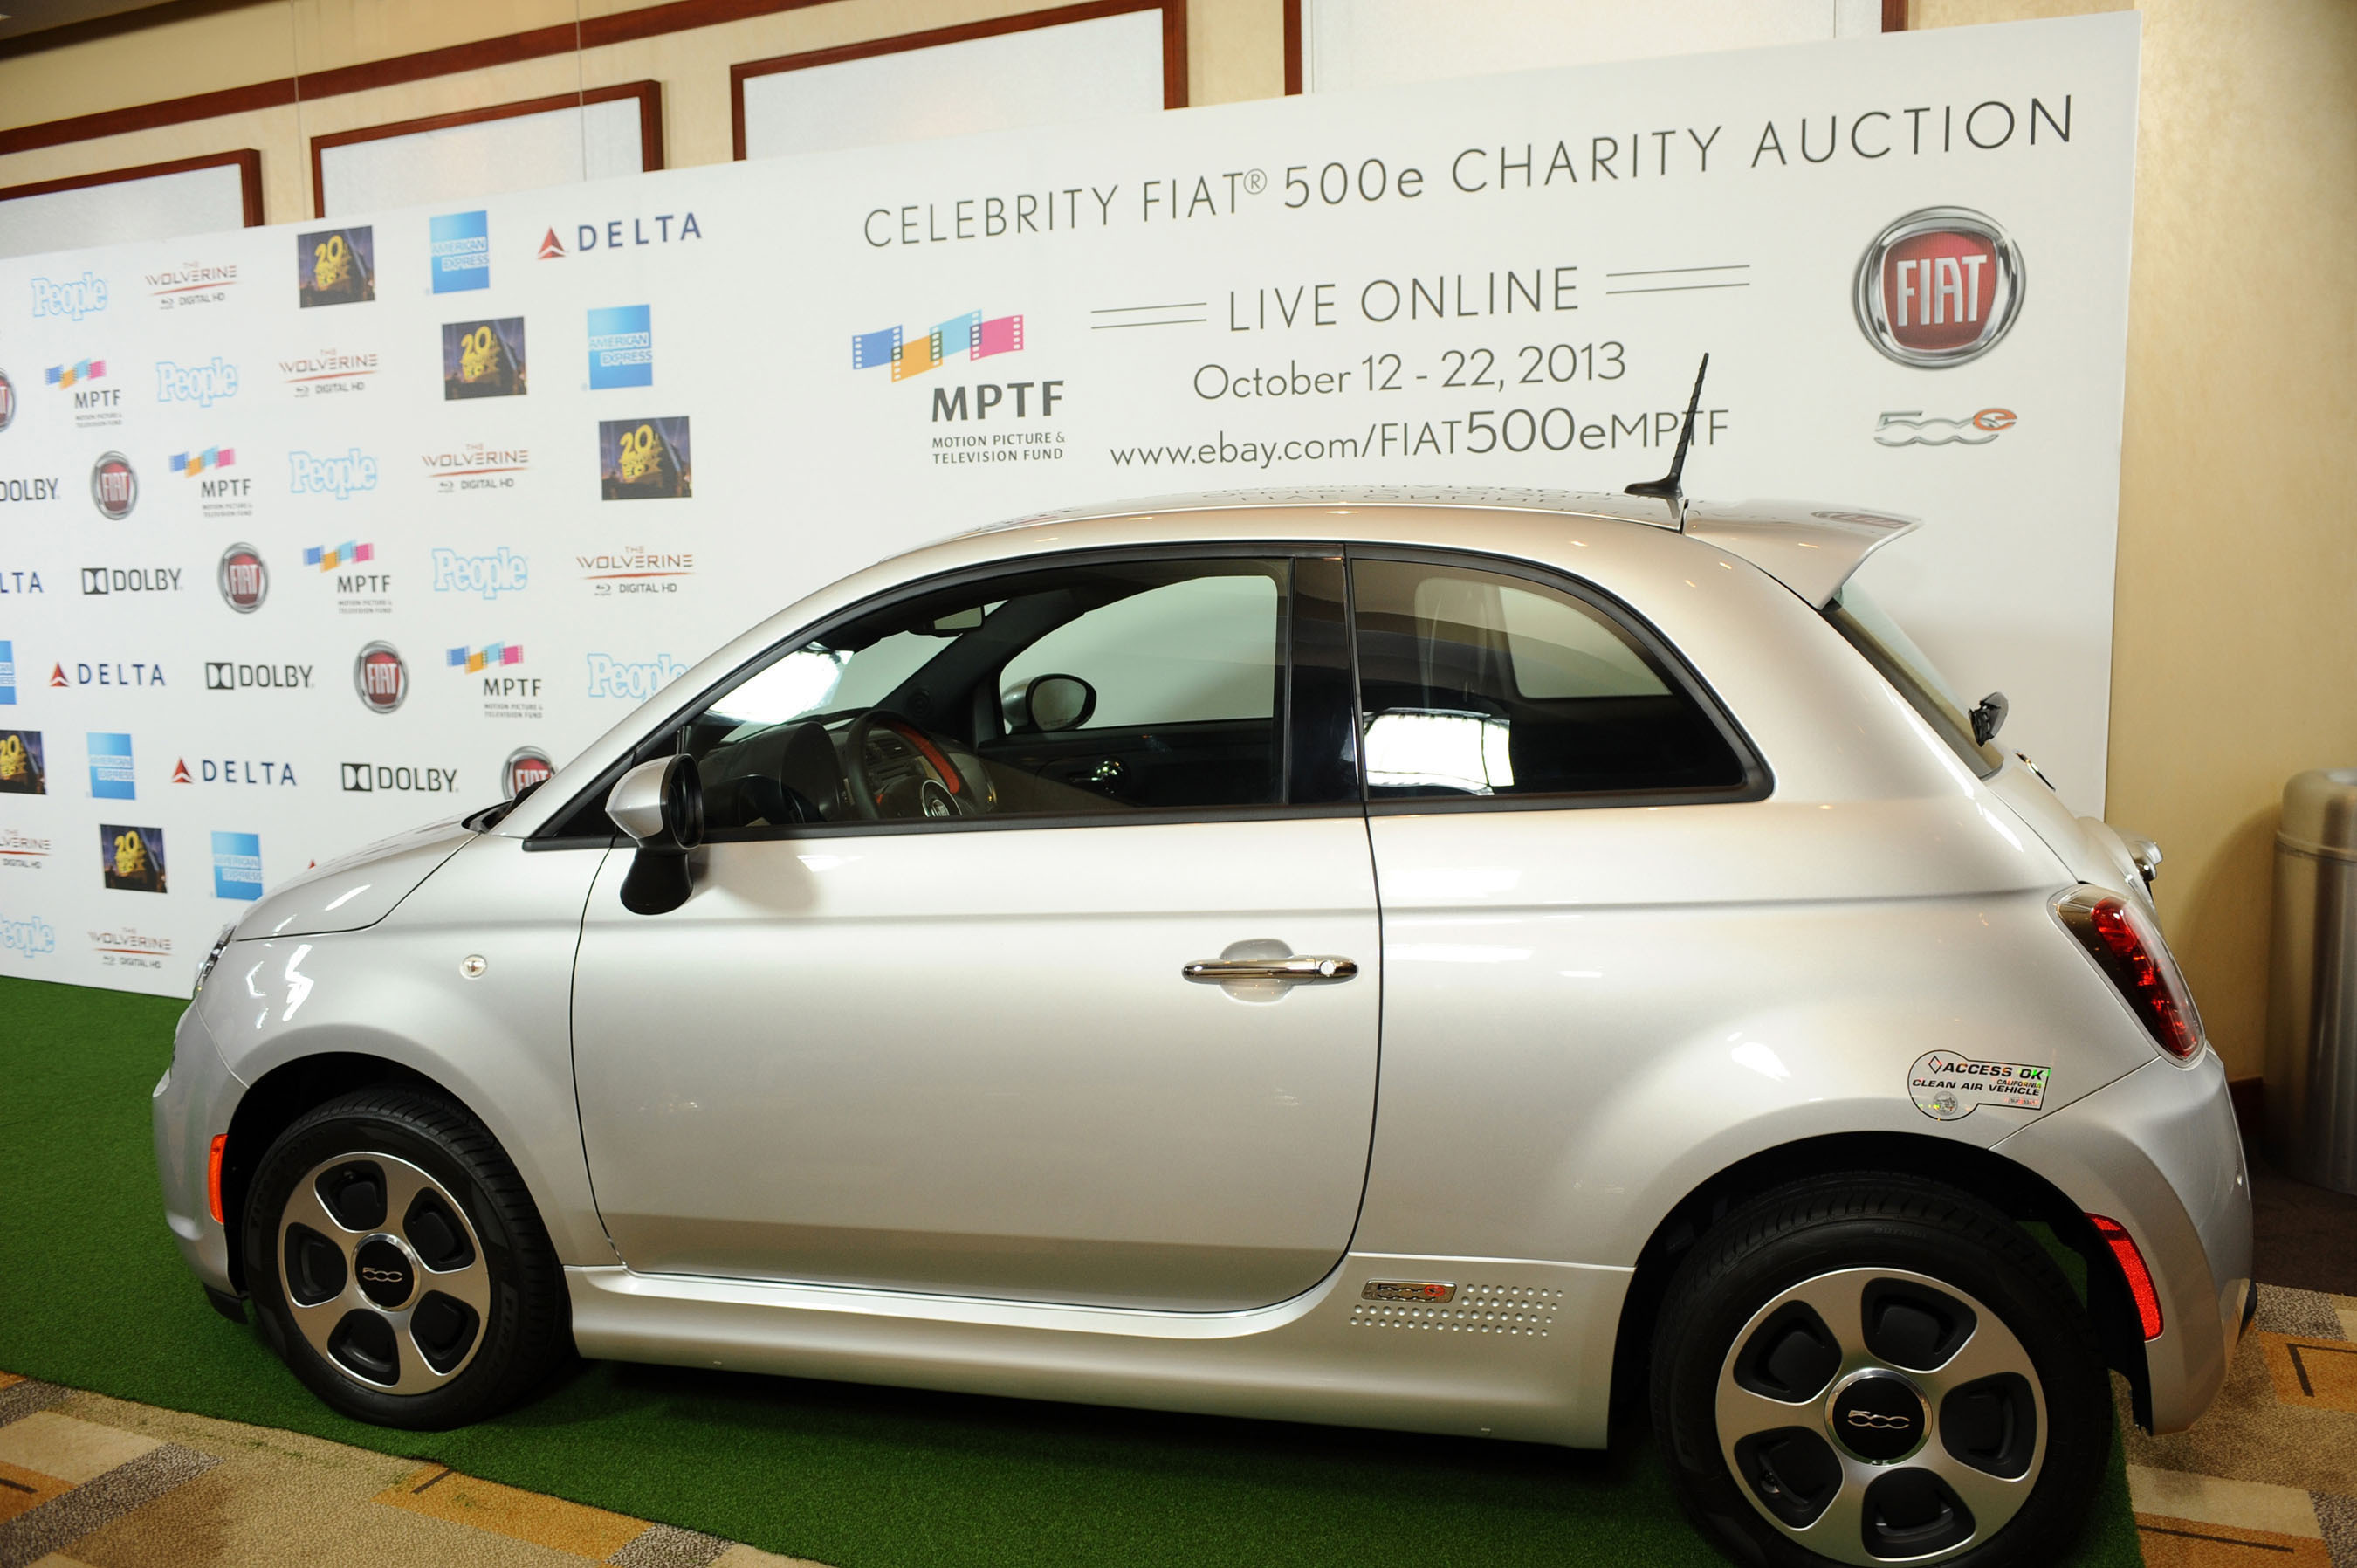 Fiat 500e Personalized by Hugh Jackman Receives Winning Auction Bid of $50,000 During MPTF's "One Night Only" Benefit on Saturday, October 12. Additional Fiat 500e vehicles have been signed by Jennifer Lawrence, Clint Eastwood, Anne Hathaway, Ron Howard, Barbra Streisand, Hans Zimmer, Kate Hudson, Will.i.am and Ryan Friedlinghaus are available for bidding until Oct. 22 on eBay Motors. (PRNewsFoto/Chrysler Group LLC) (PRNewsFoto/CHRYSLER GROUP LLC)